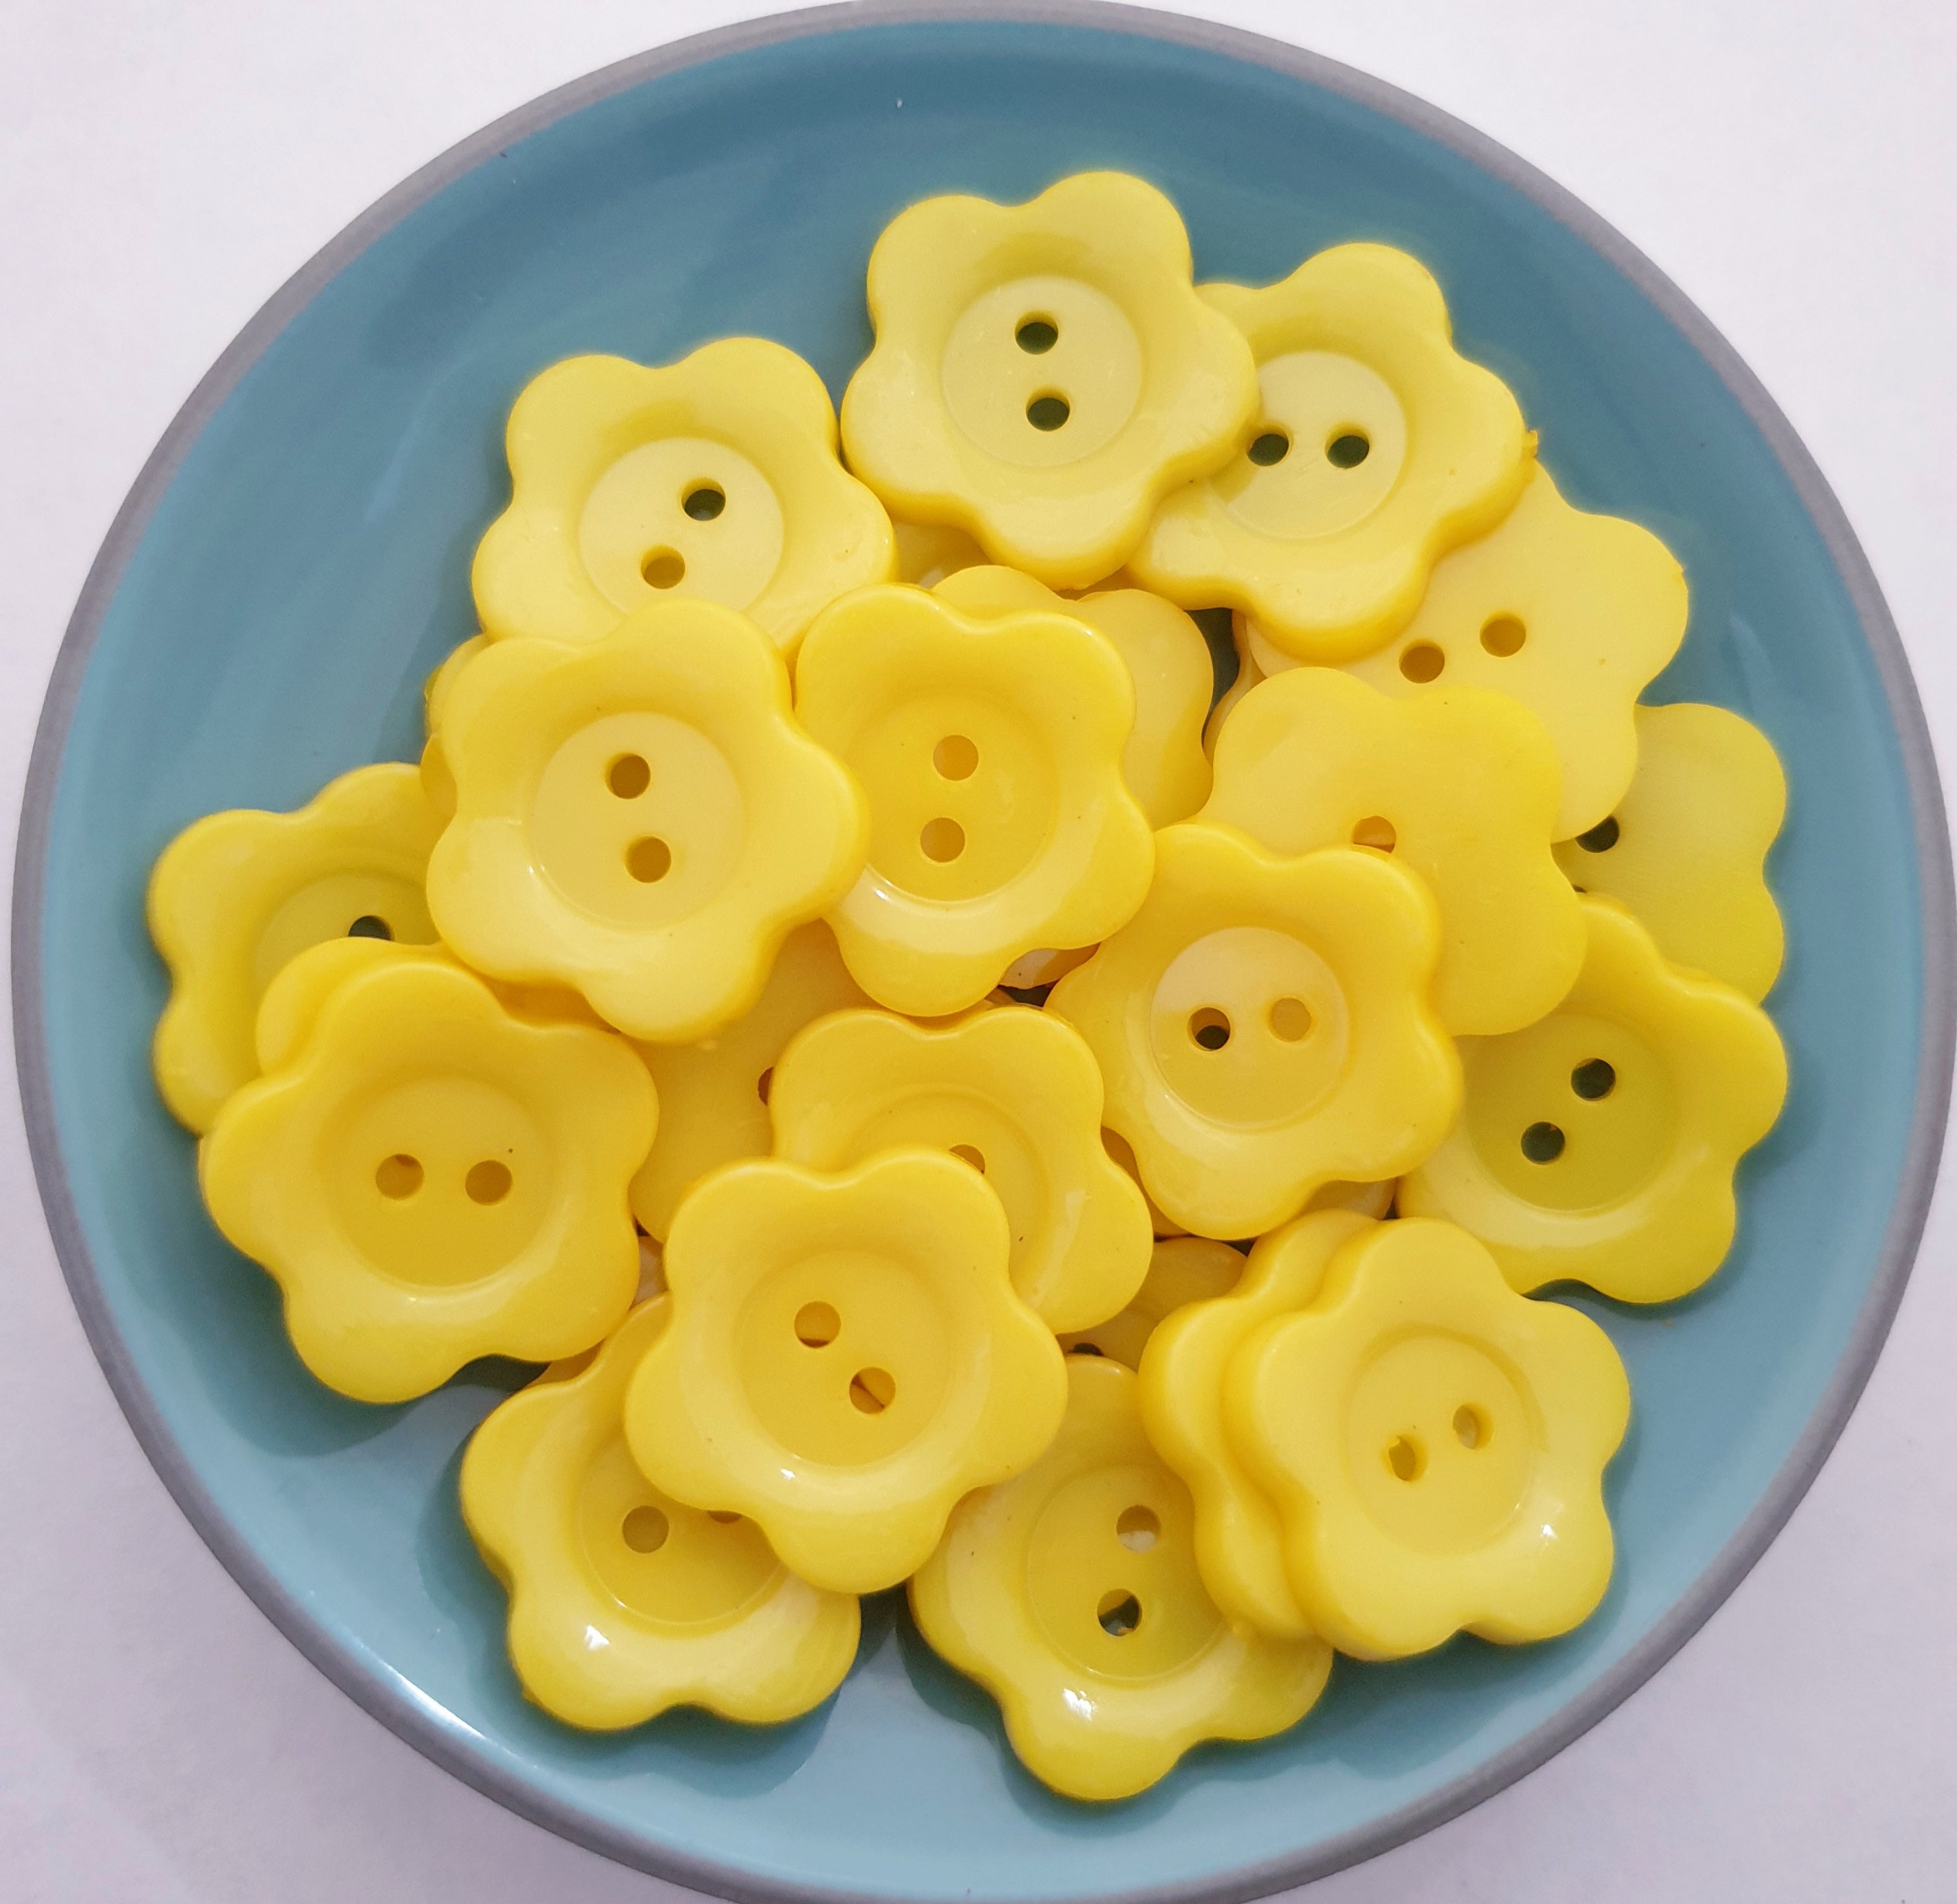 MajorCrafts 34pcs 22mm Bright Yellow Flower Shaped 2 Holes Resin Sew-on Buttons